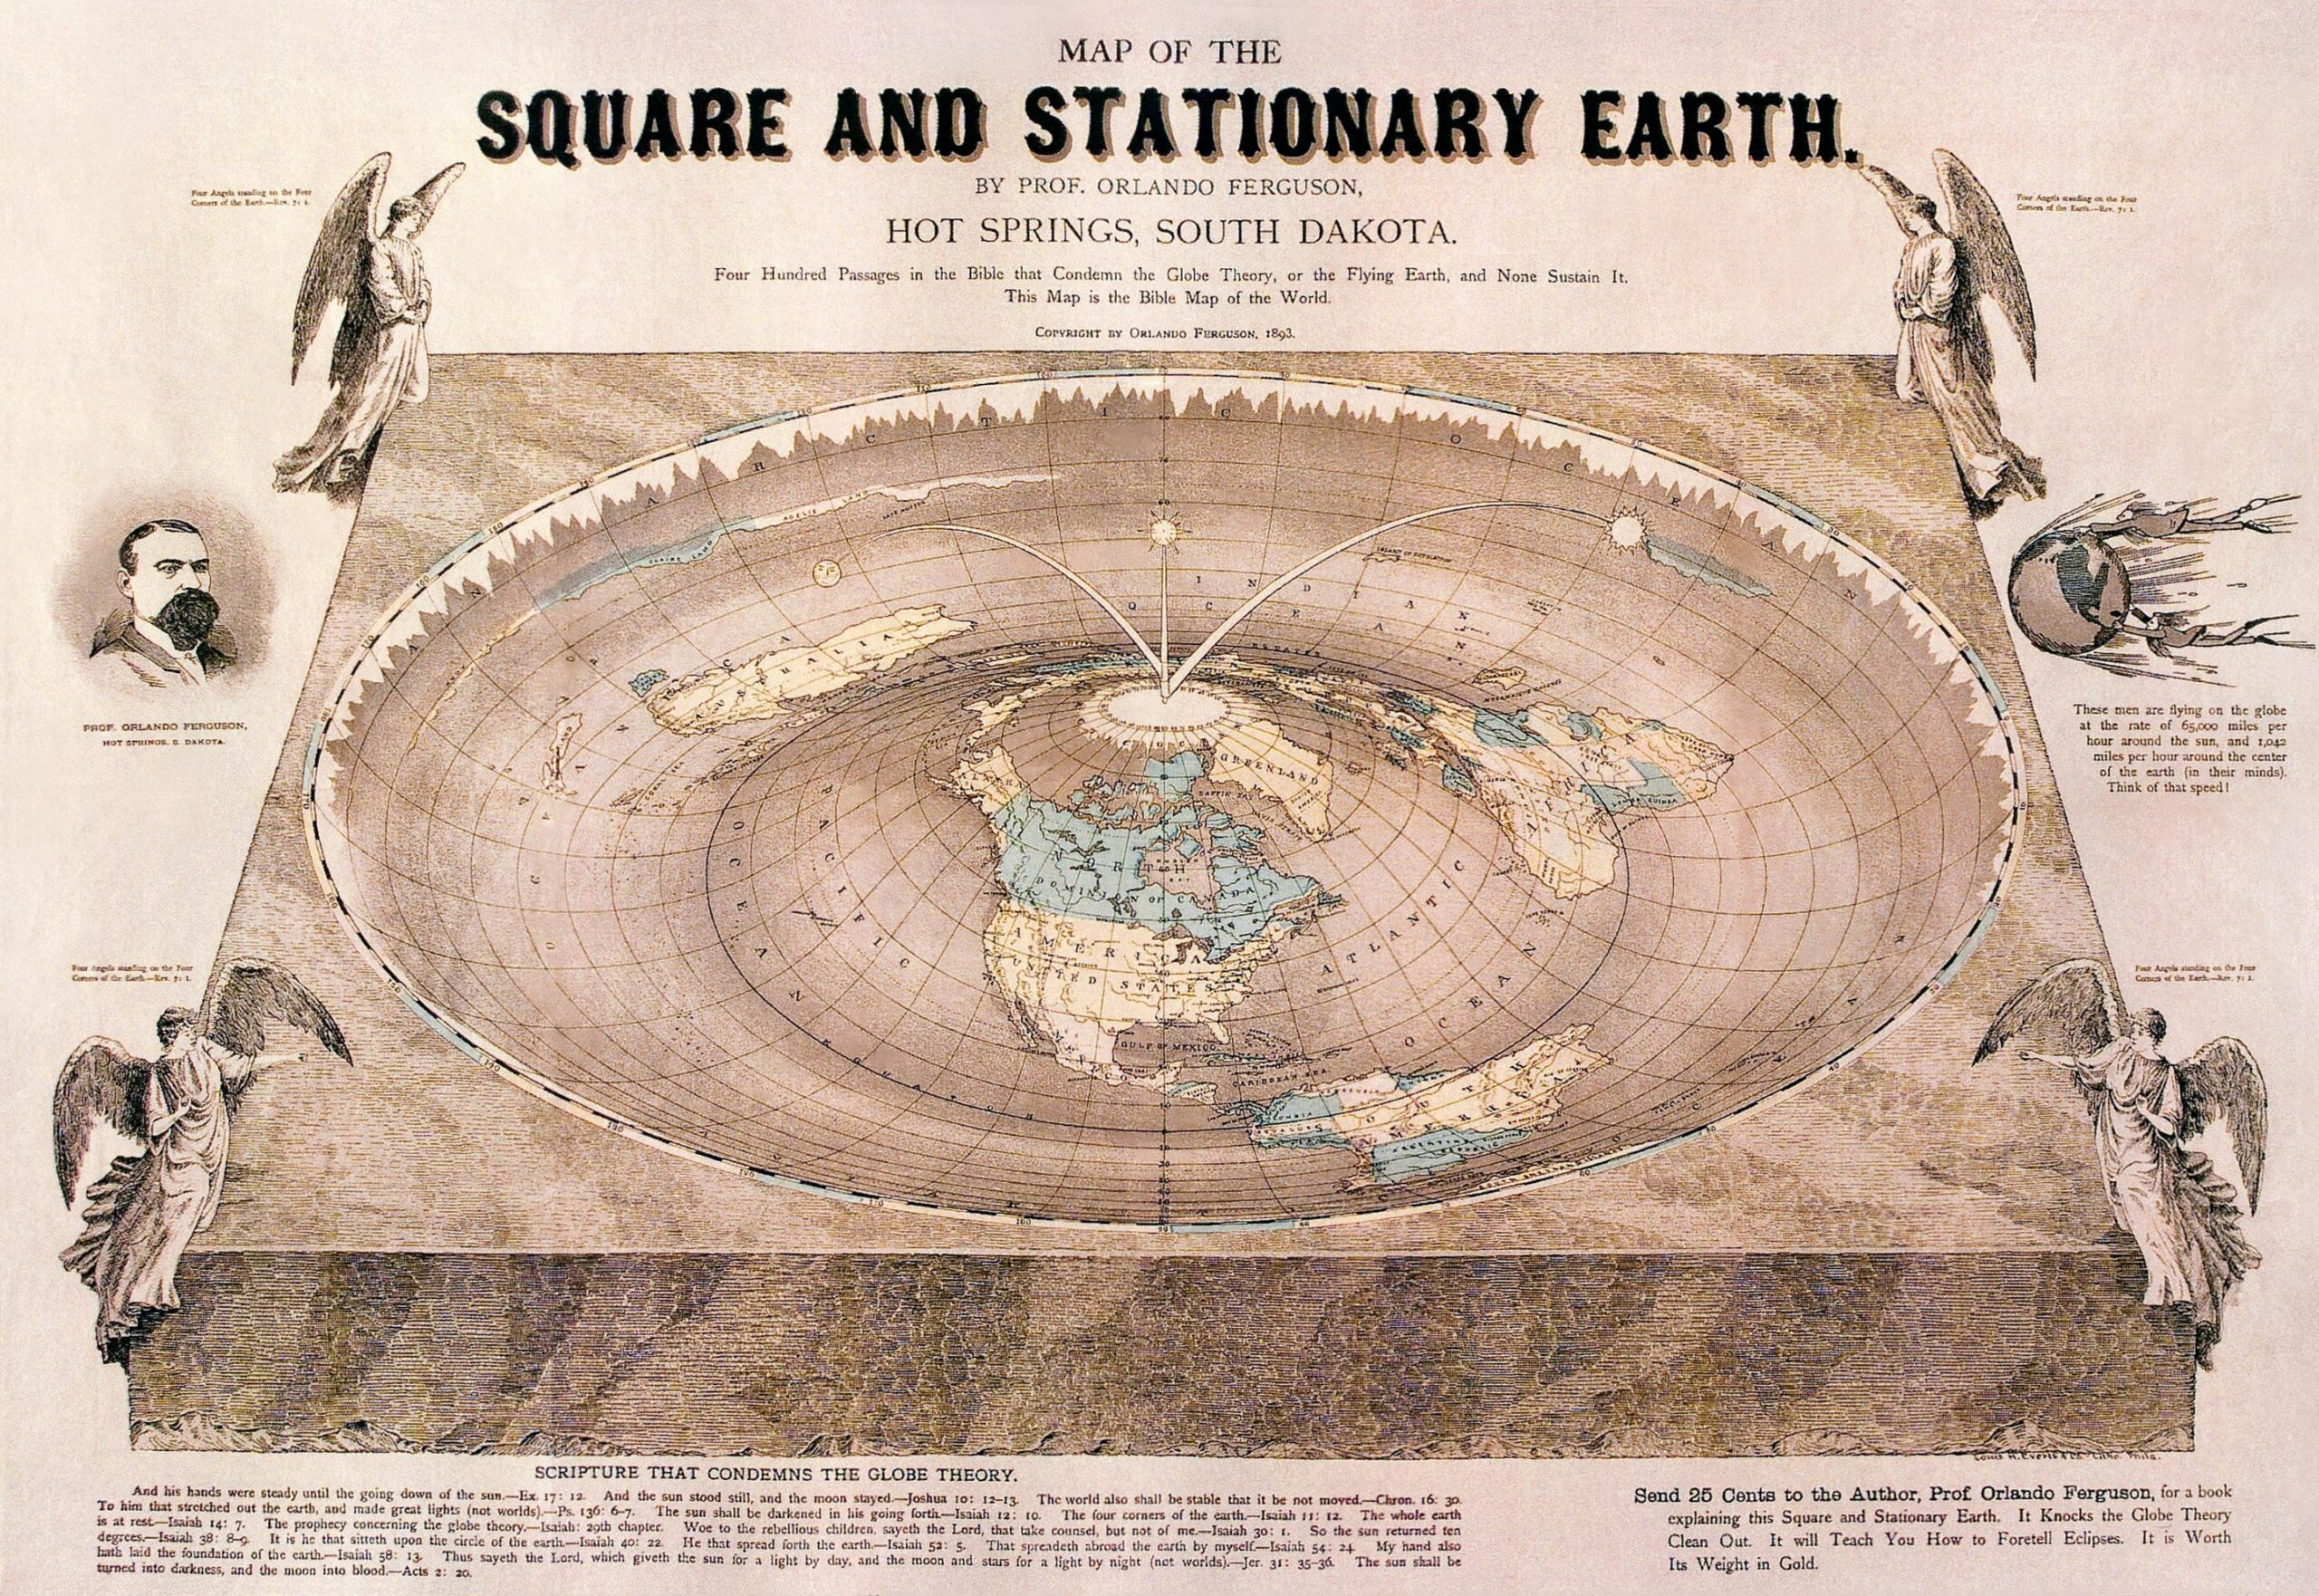 Round or flat? Flat Earth map drawn by Orlando Ferguson in 1893. The map contains several references to biblical passages as well as various jabs at the "Globe Theory". (Source: Wikipedia)